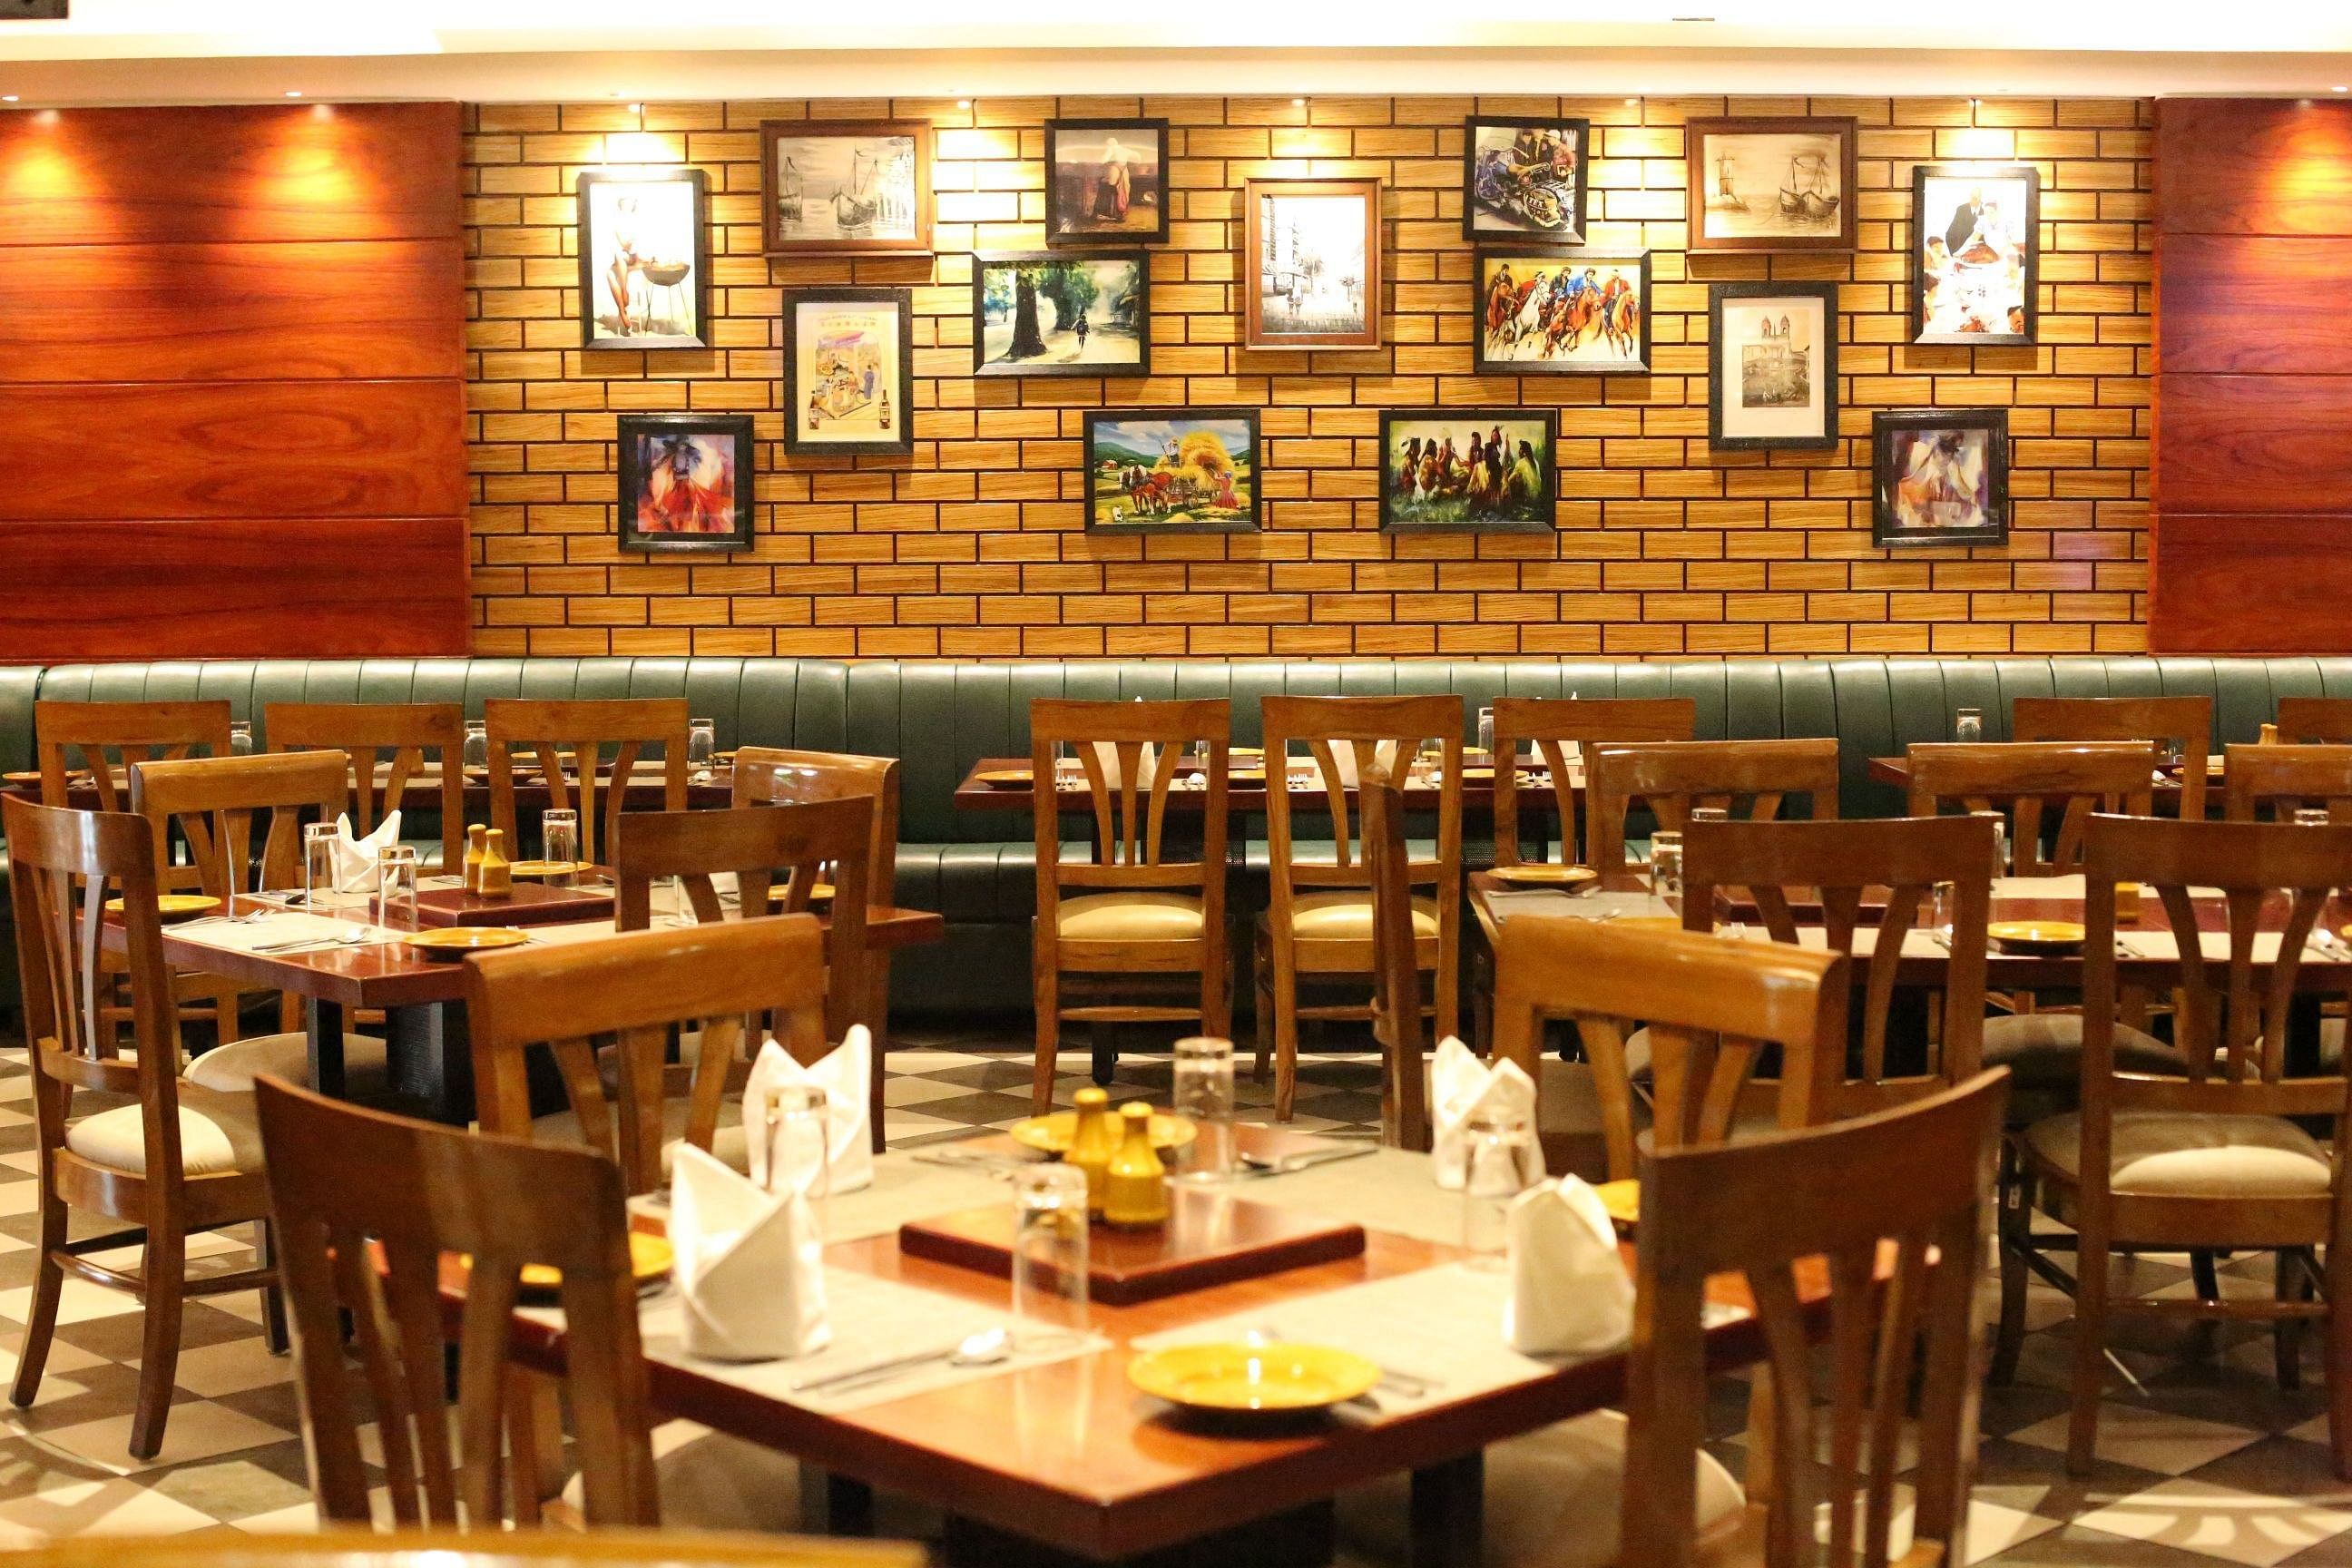 Stonfire Barbeque in Sector 62, Noida